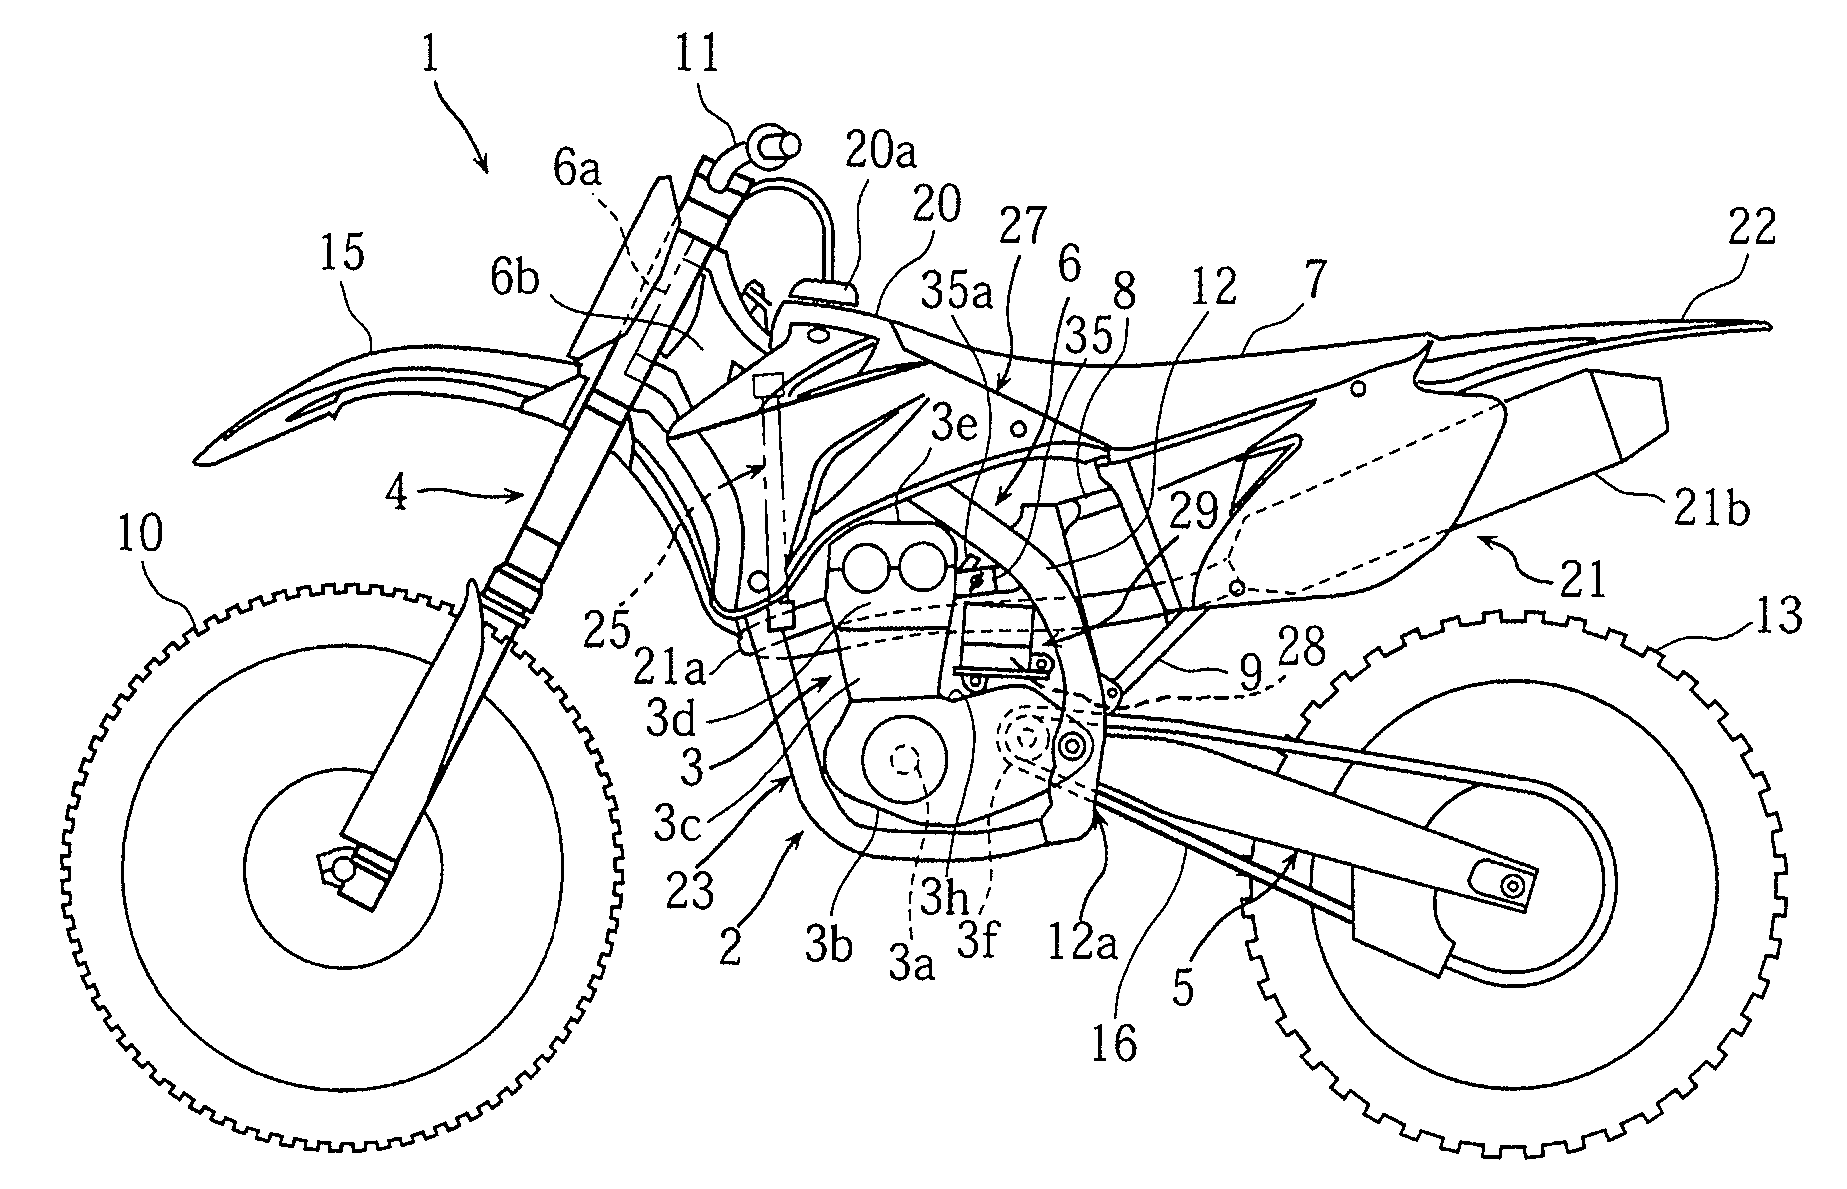 Motorcycle with battery mounting arrangement